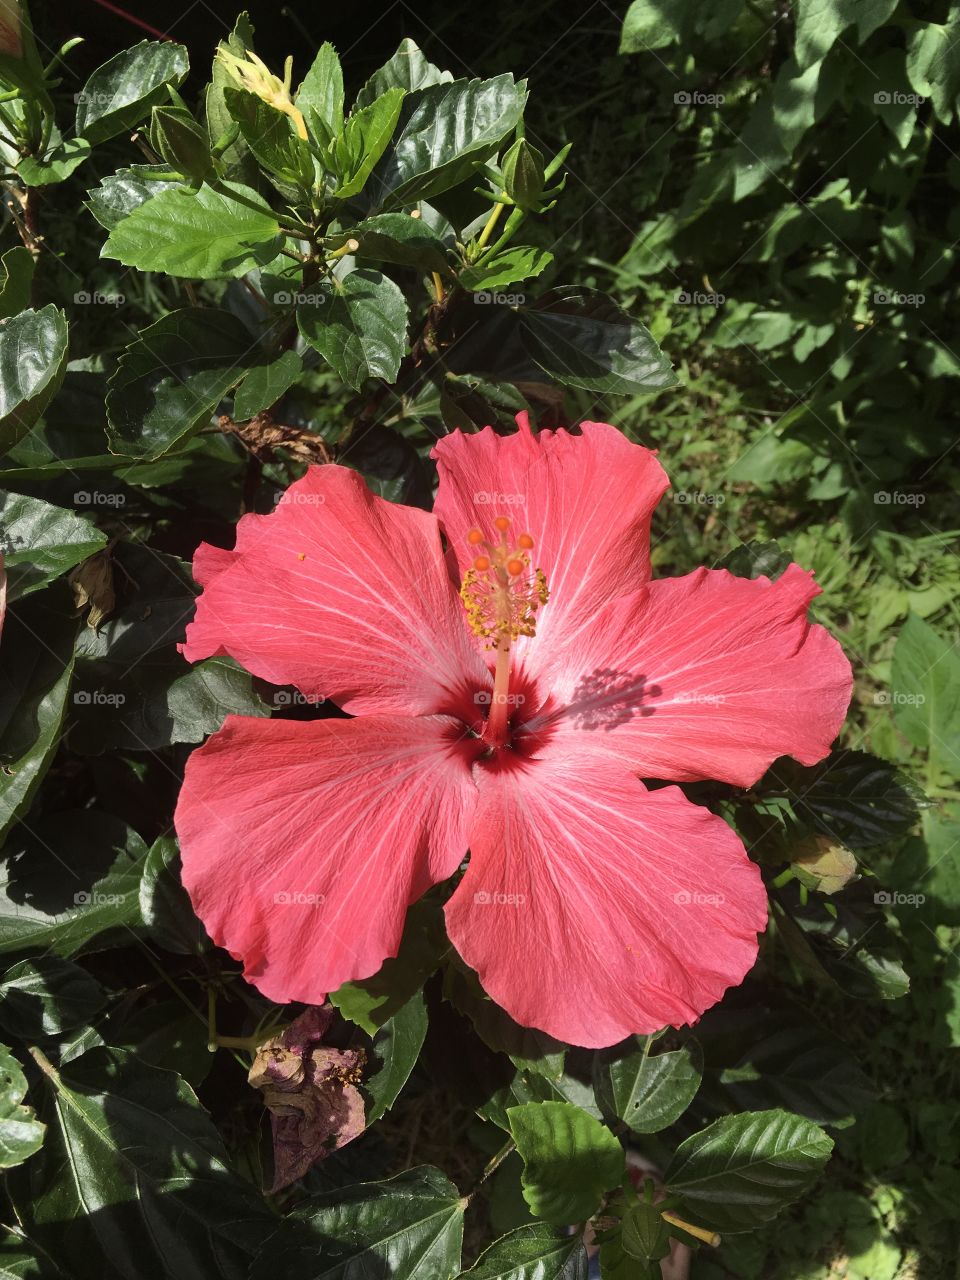 Hibiscus from the back yard :)